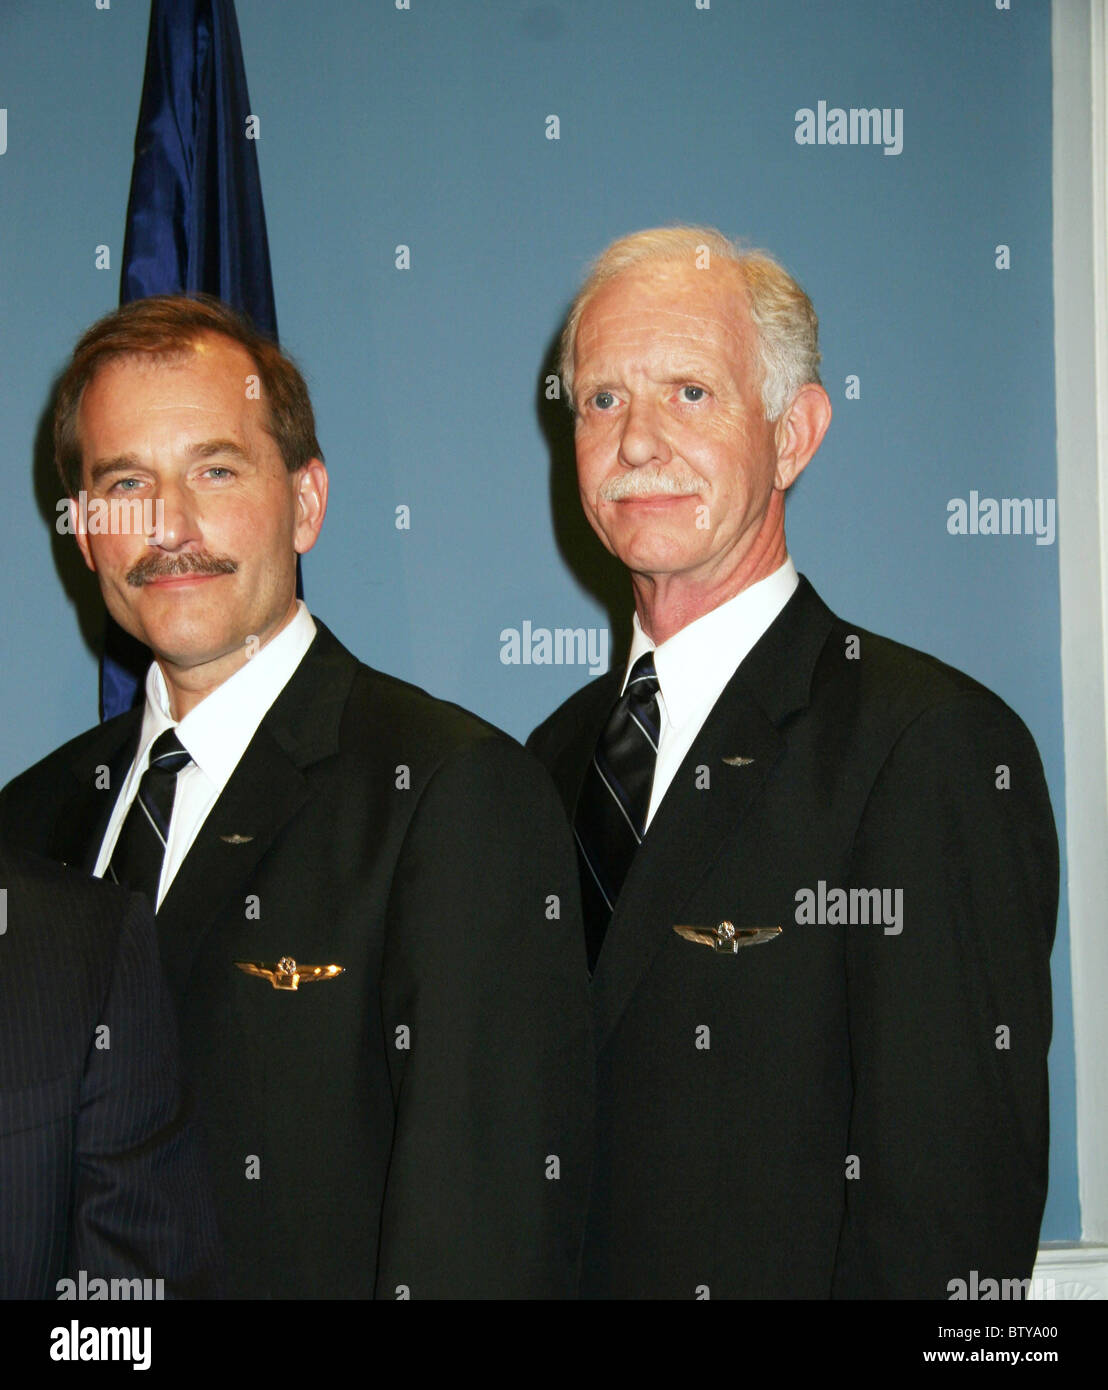 Chesley Sullenberger Pilot High Resolution Stock Photography and Images -  Alamy